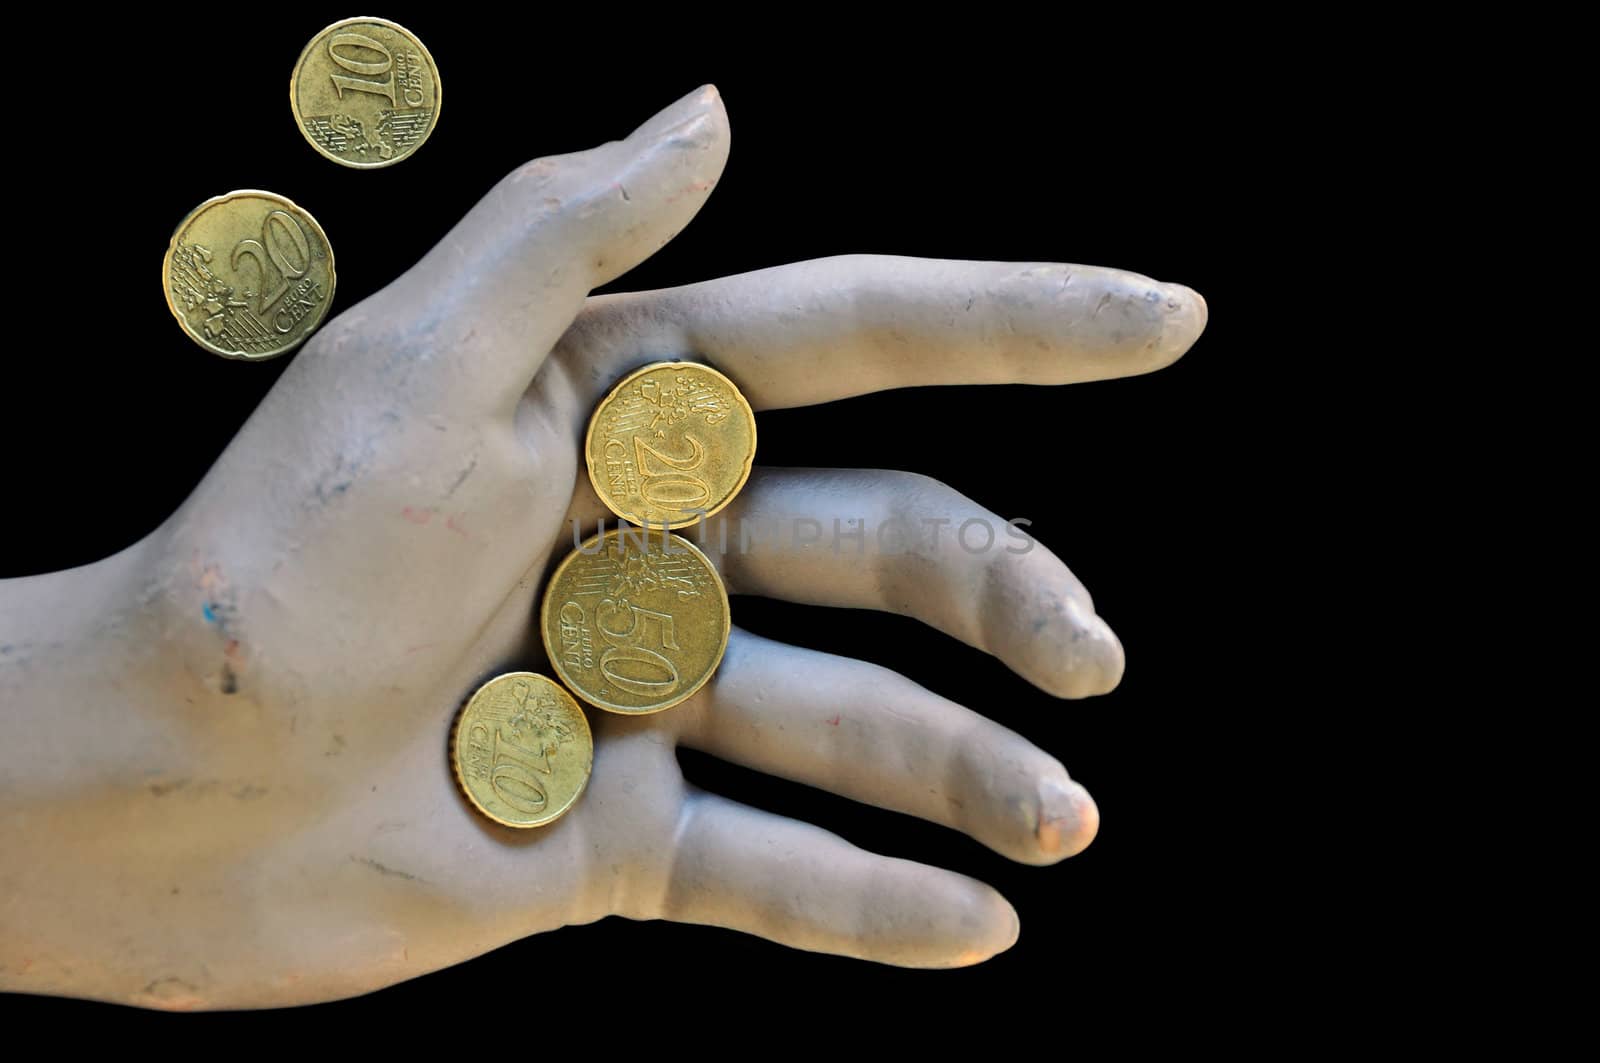 worn doll hand holding euro coins by sirylok